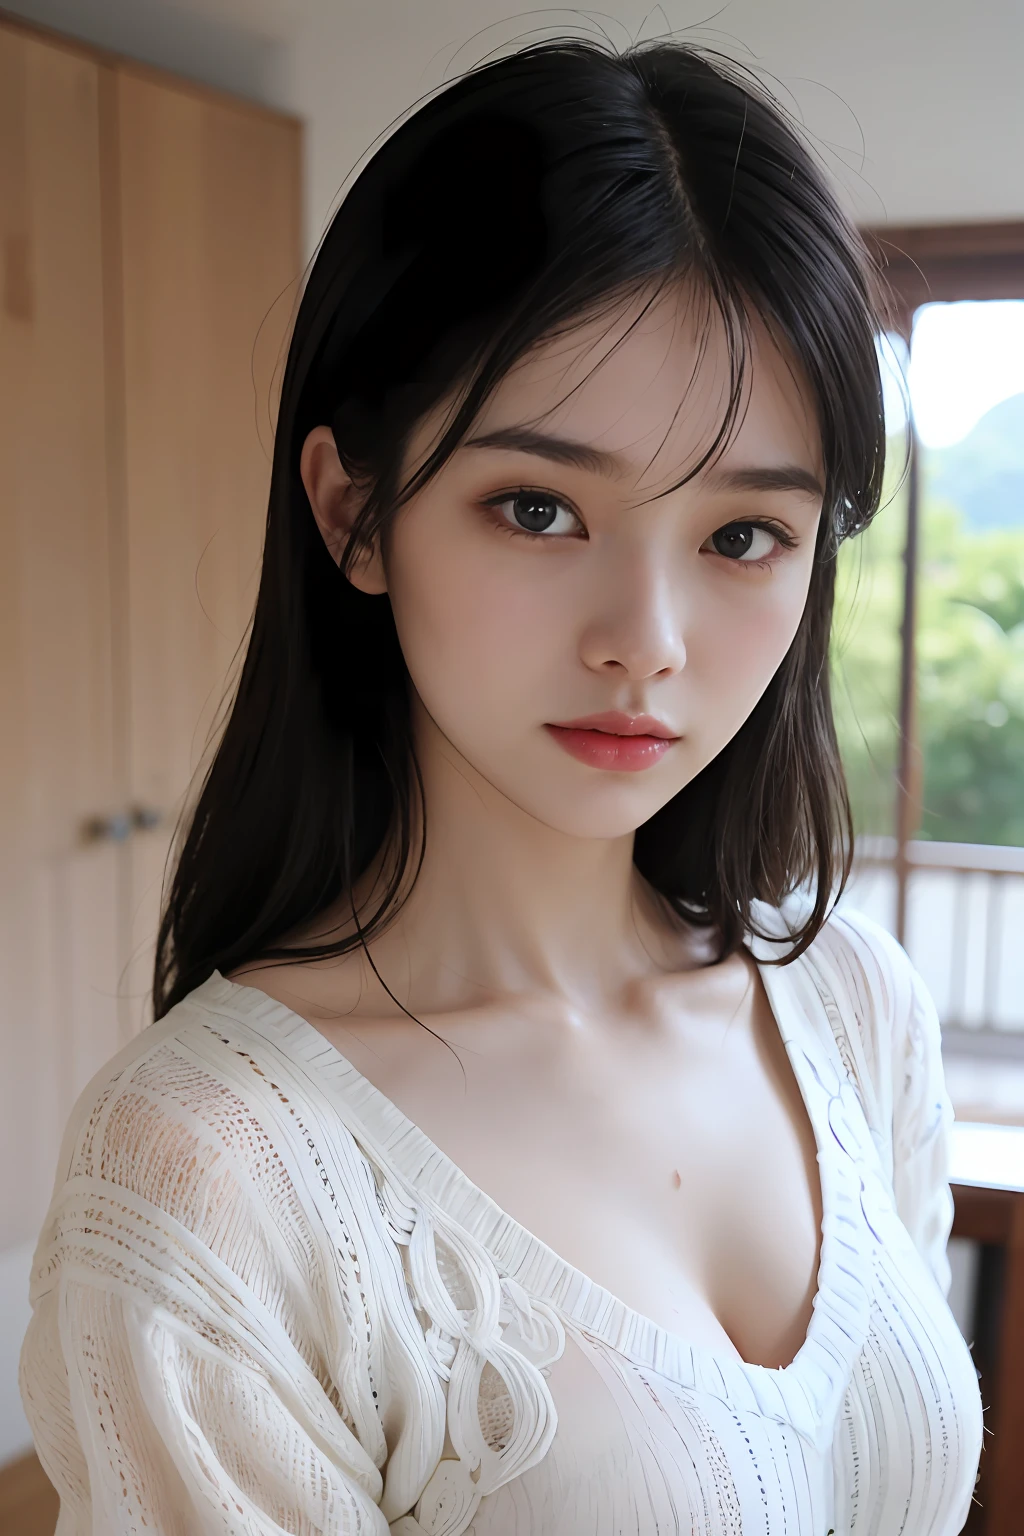 "Masterpieces of photography, Top quality and ultra-detailed appearance. Japan student woman looking young, Present sensual nuances, Please wear transparent clothing and wet knitwear, The background may be blurry, however、The main image must be clear and clear. (1 girl), Blue eyes, Long Black Hair, Modern and gentle hairstyle. Close-ups of your skin should emphasize the richness of details. Context optimization、It is necessary to strengthen its characteristics."